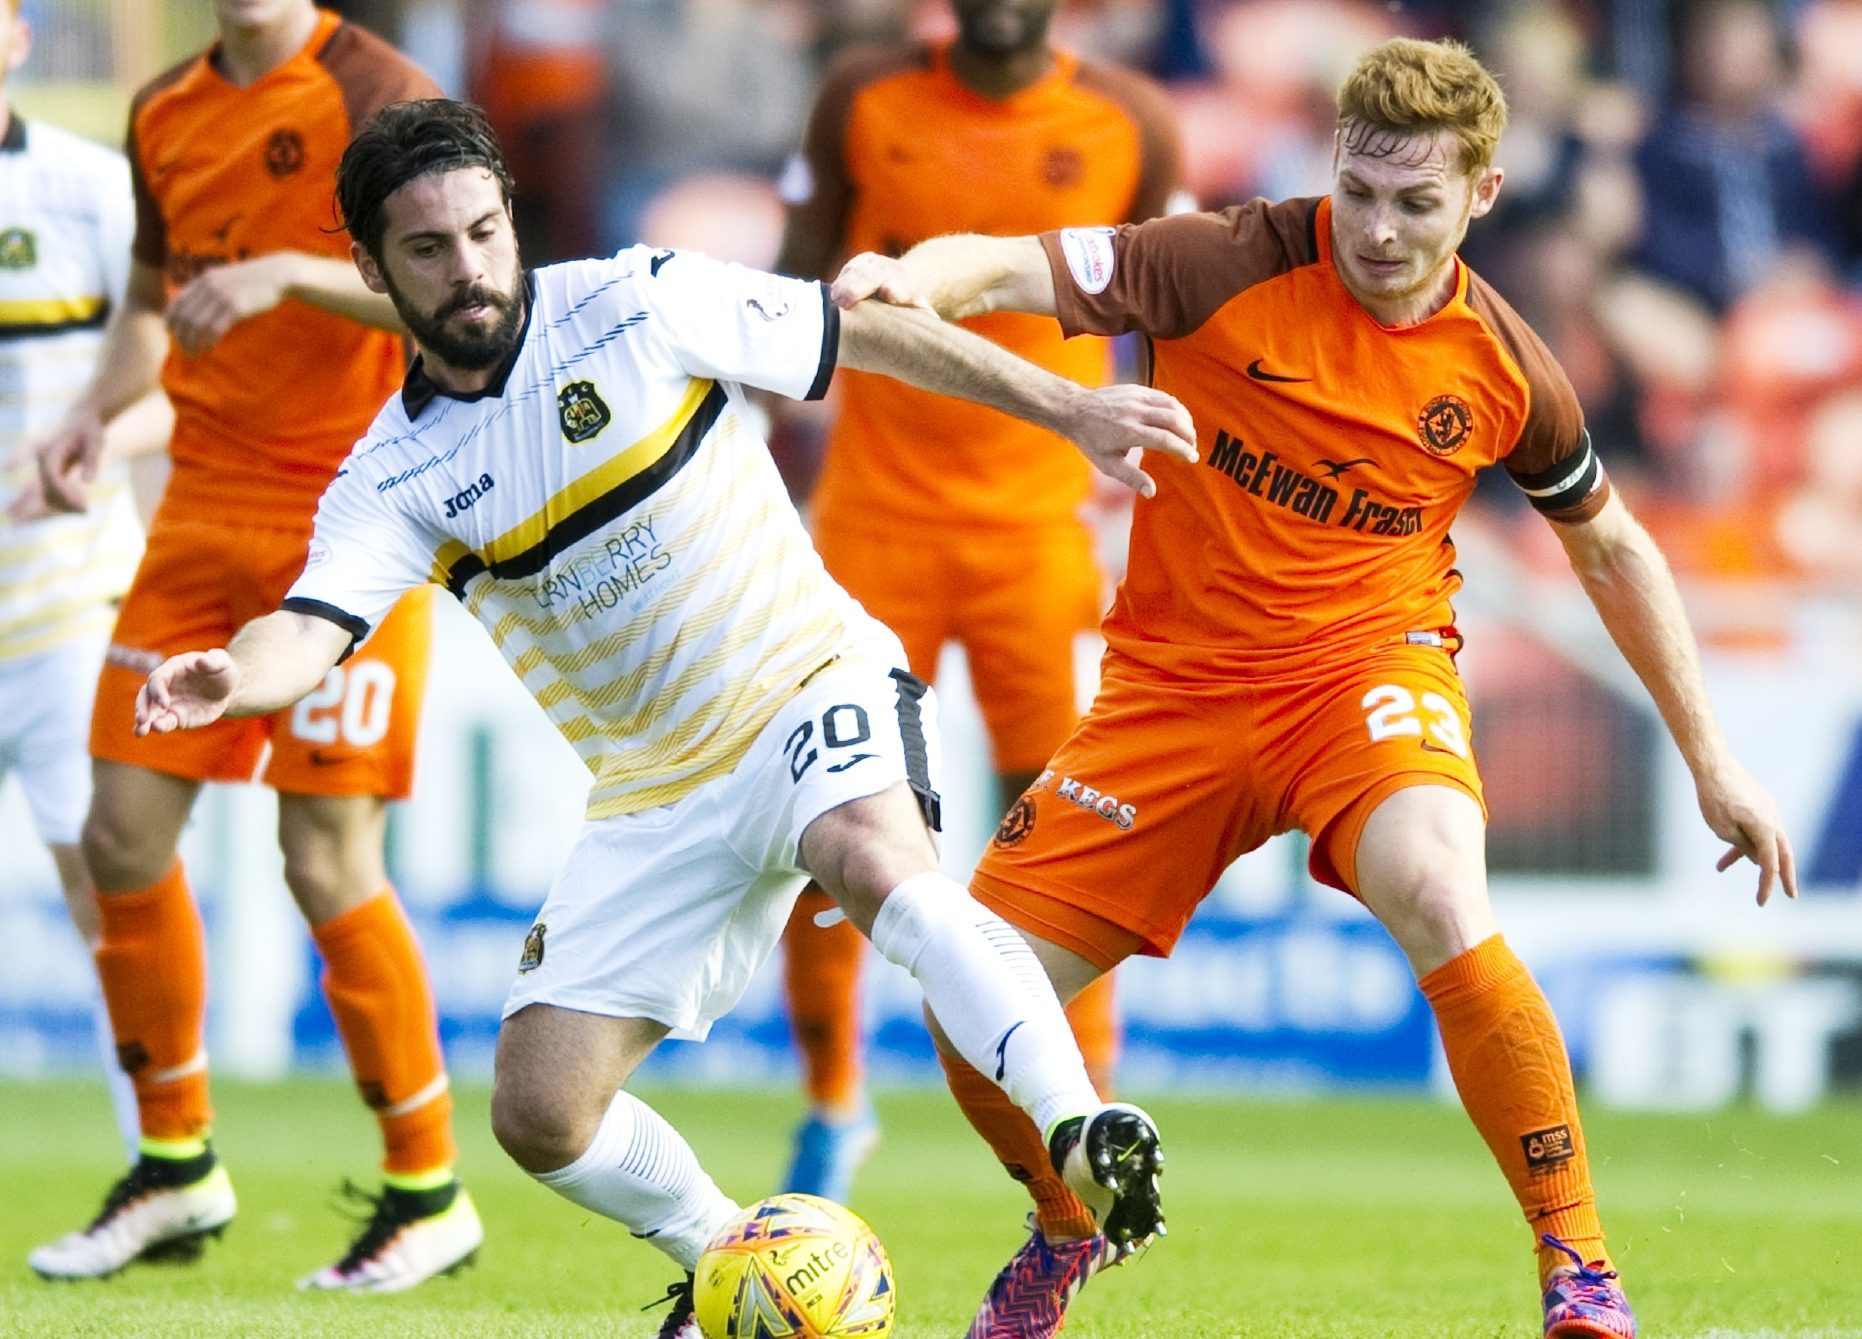 Dimitris Froxylias and Fraser Fyvie battle for possession.